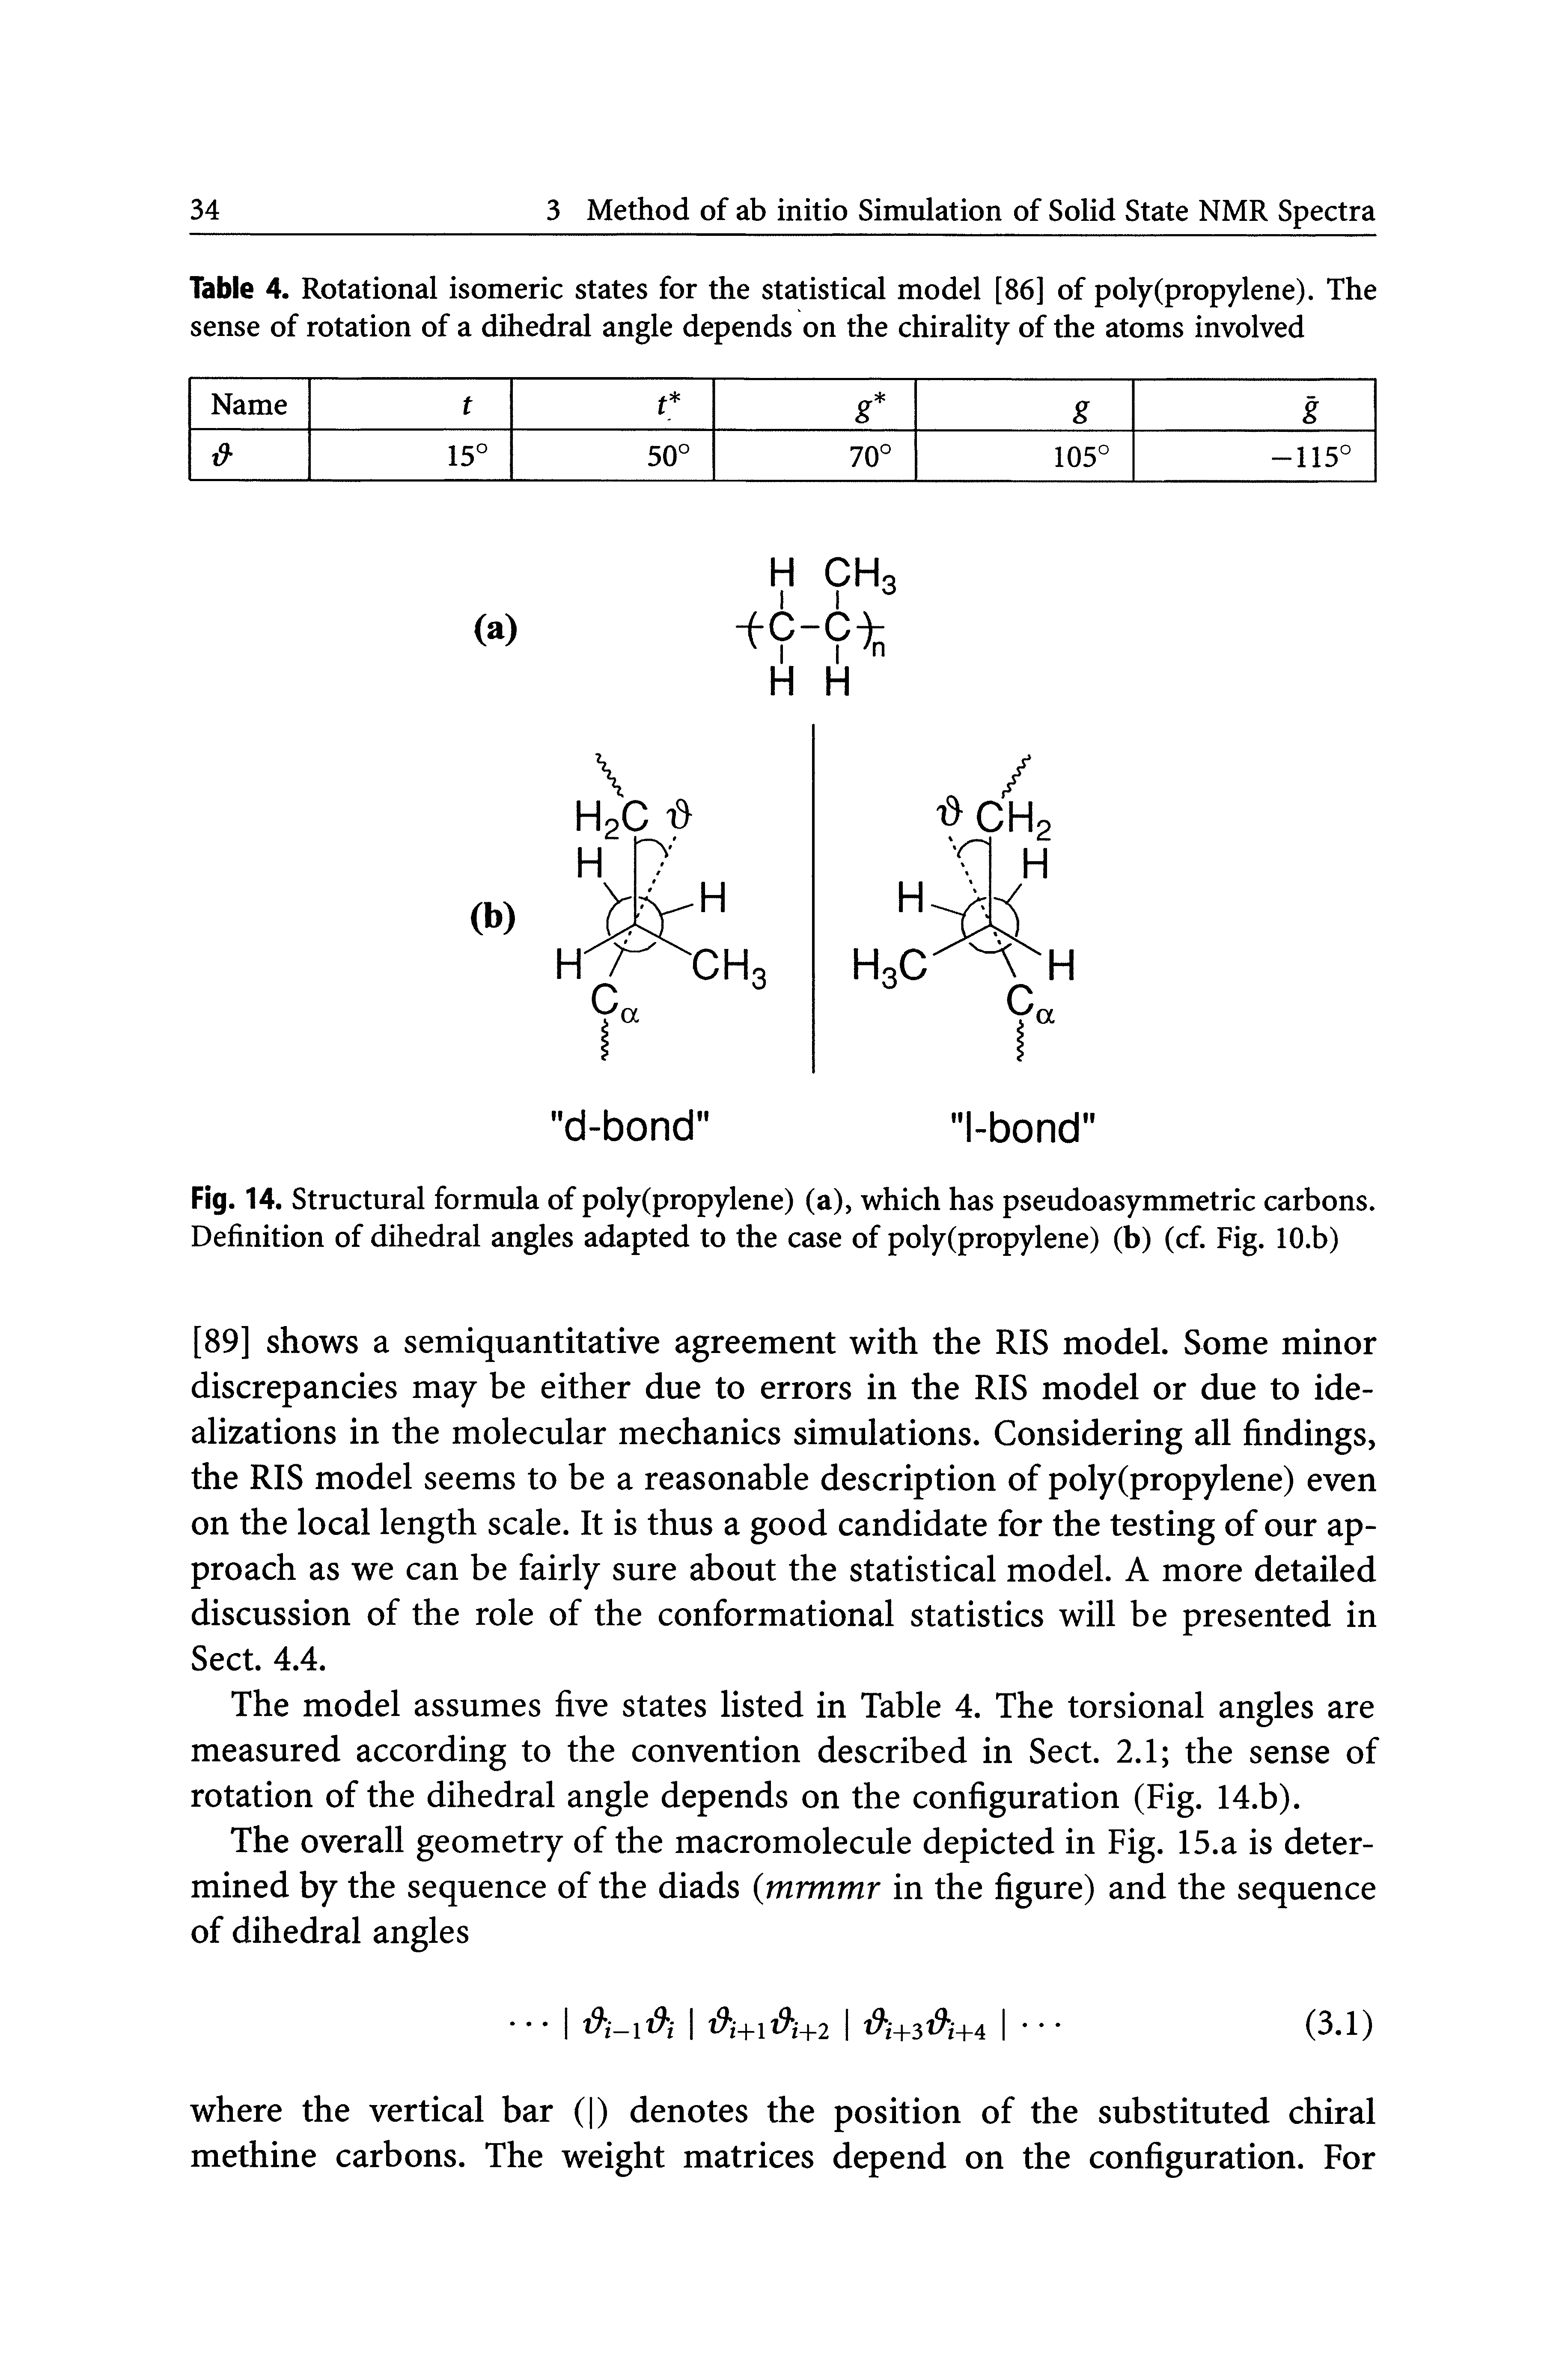 Fig. 14. Structural formula of poly(propylene) (a), which has pseudoasymmetric carbons. Definition of dihedral angles adapted to the case of poly(propylene) (b) (cf. Fig. lO.b)...